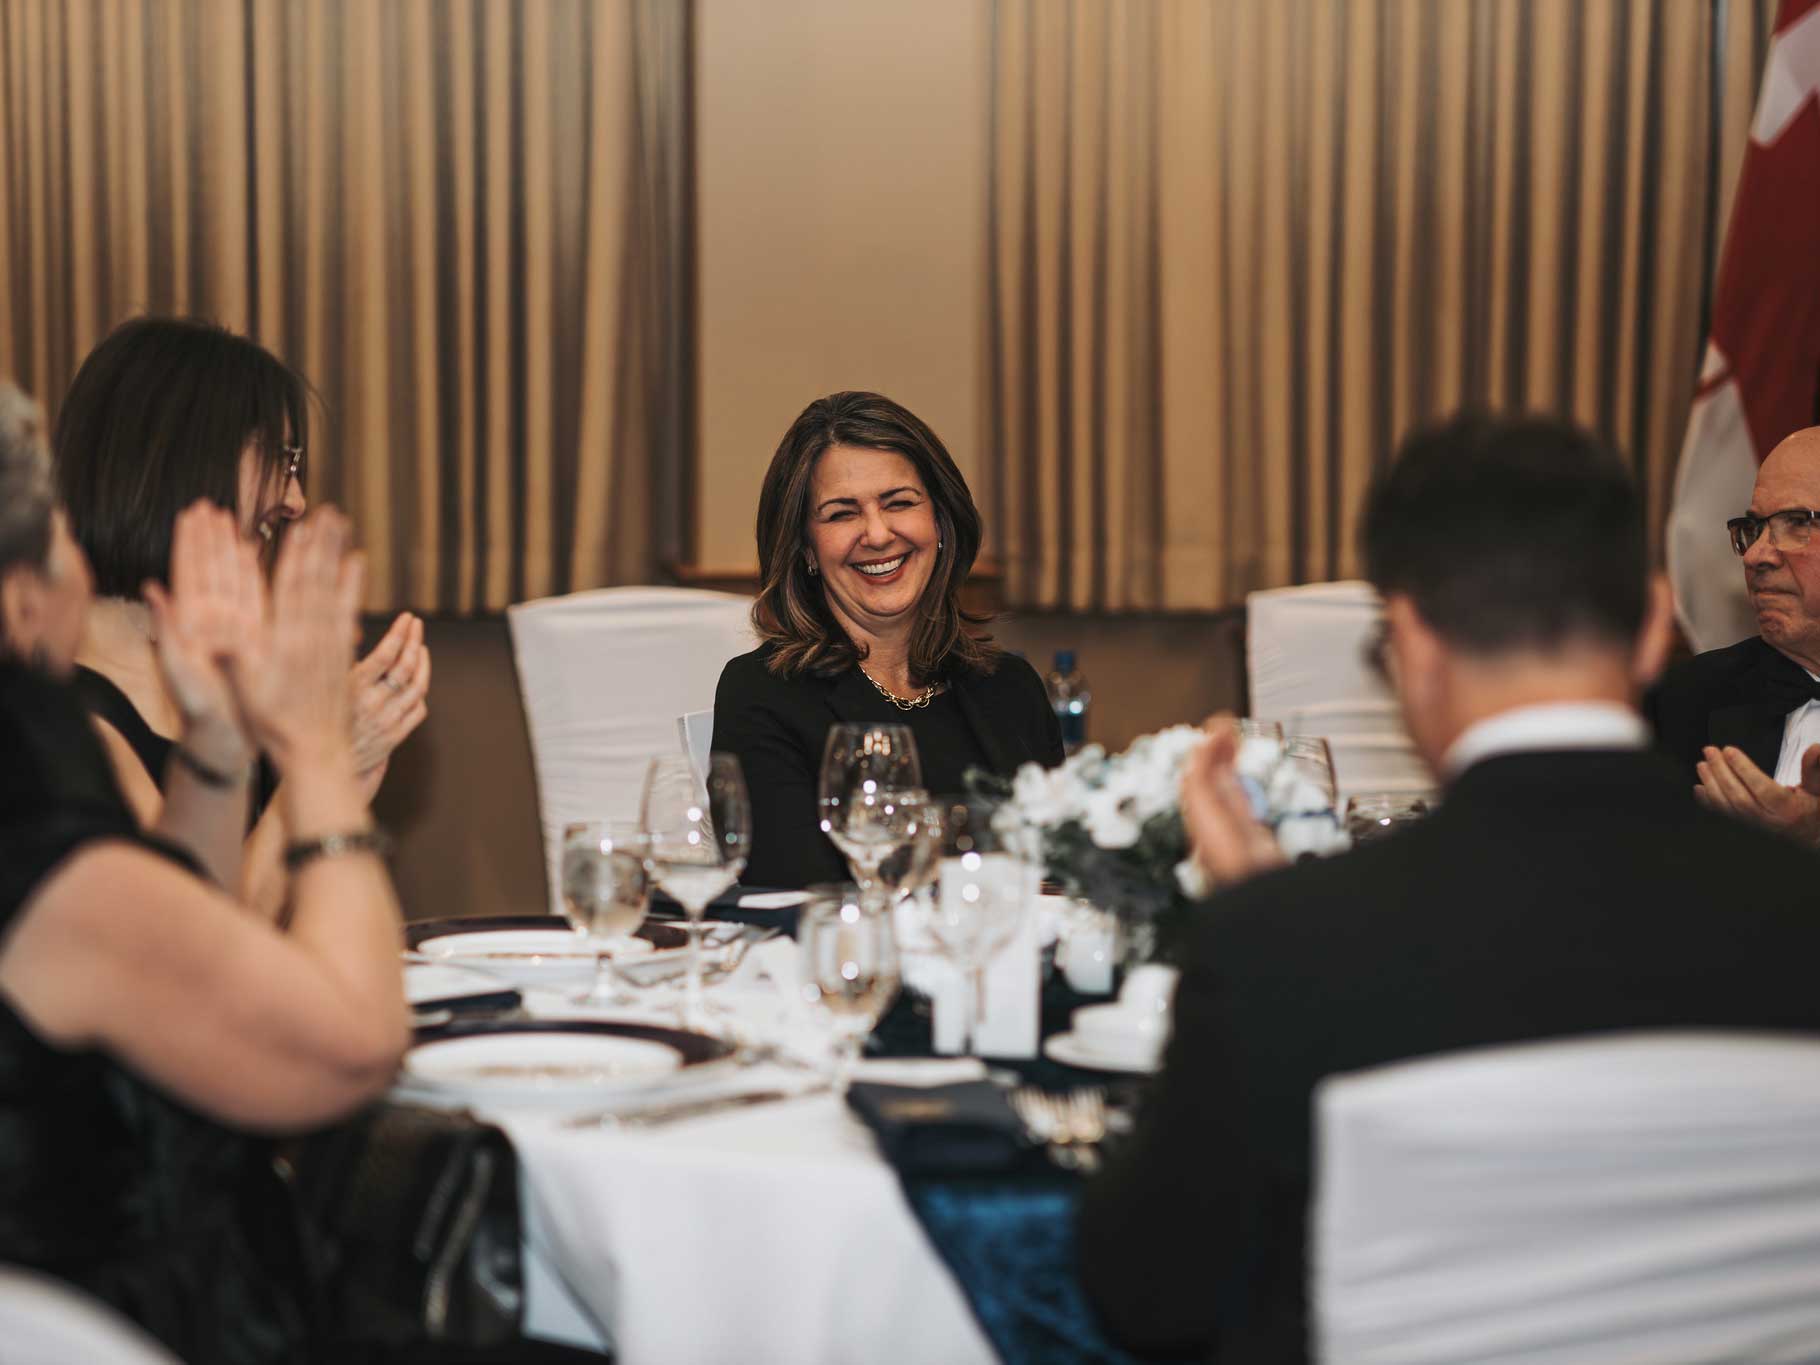 A 50-ish woman with shoulder-length dark hair and a dark suit smiles at the centre of the photo, with others applauding her round a fancy dinner table.